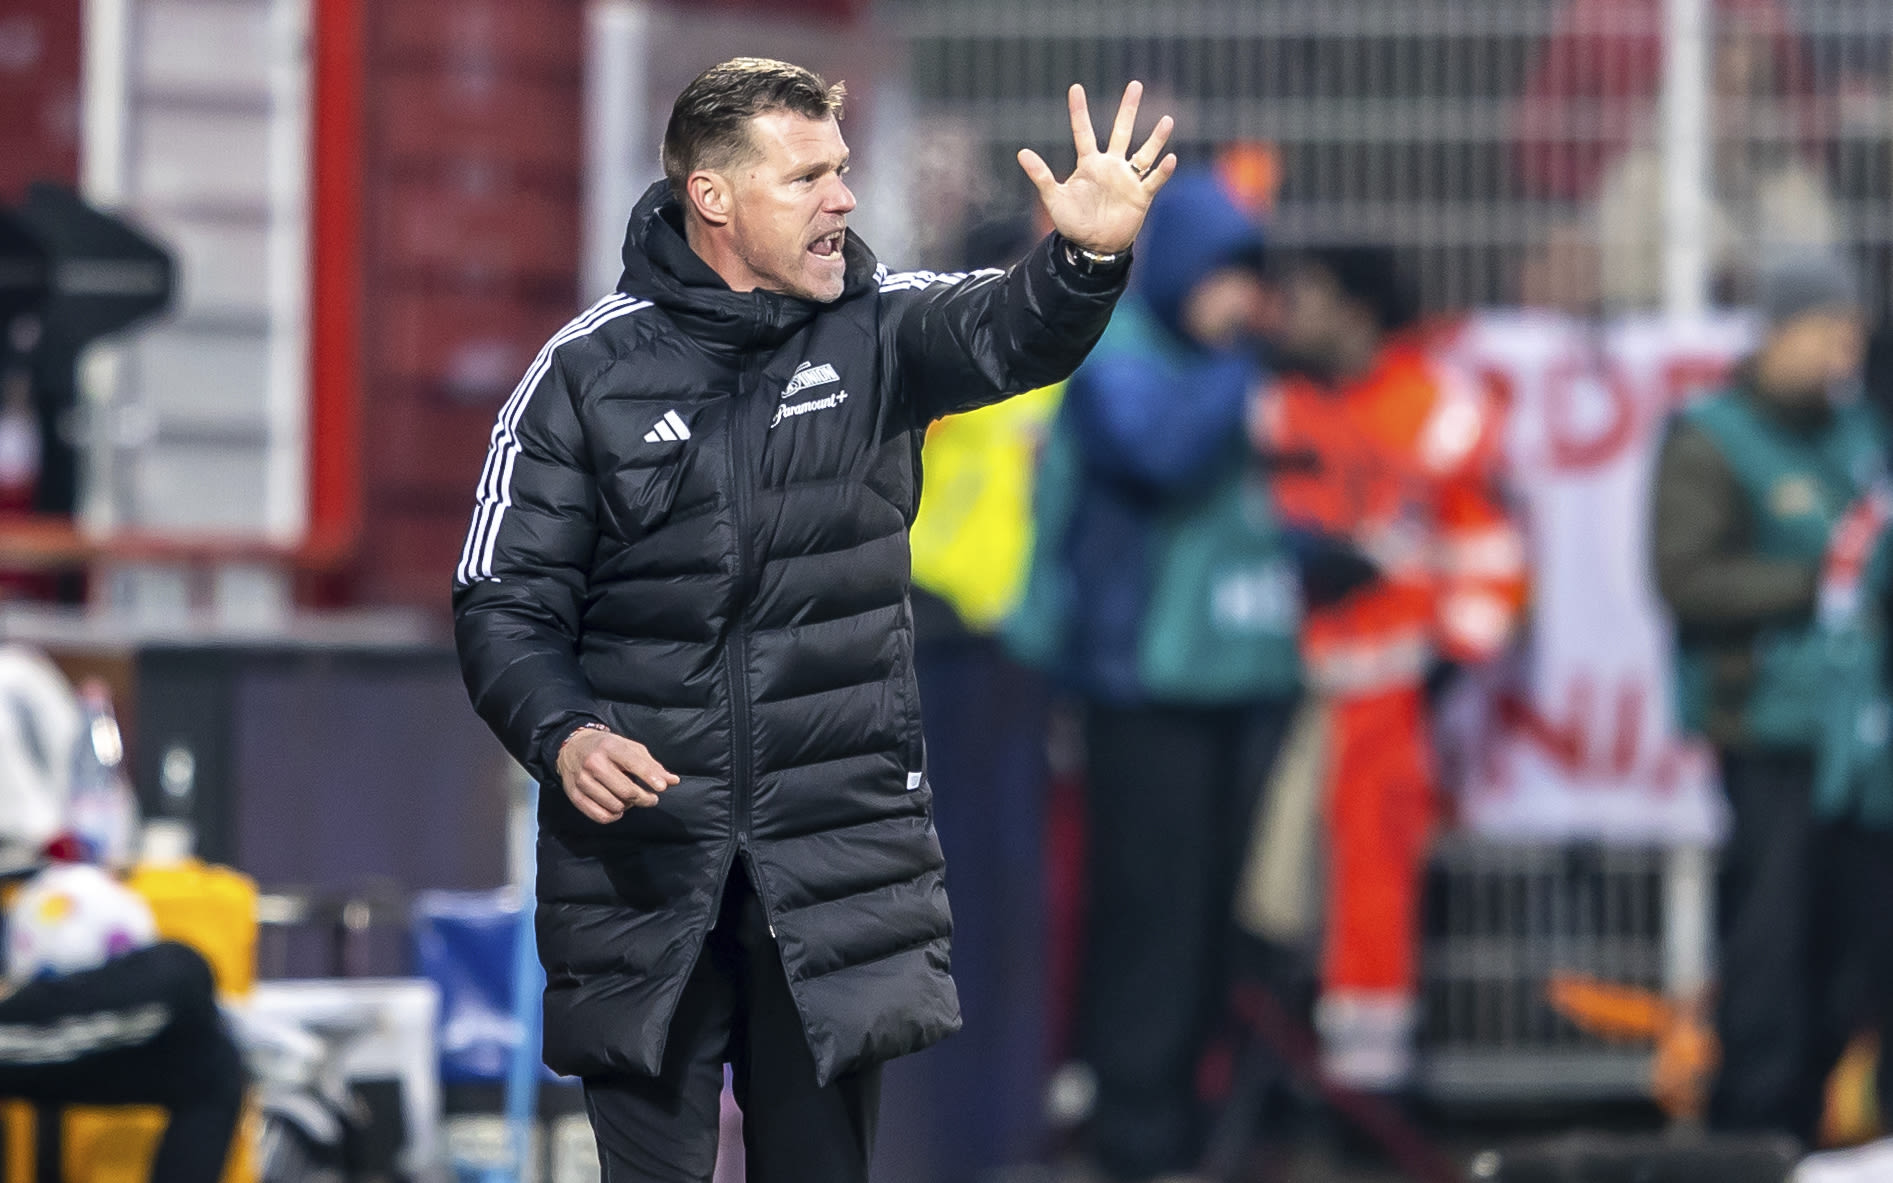 From Real Madrid to relegation scrap: Union Berlin fires another coach as season unravels